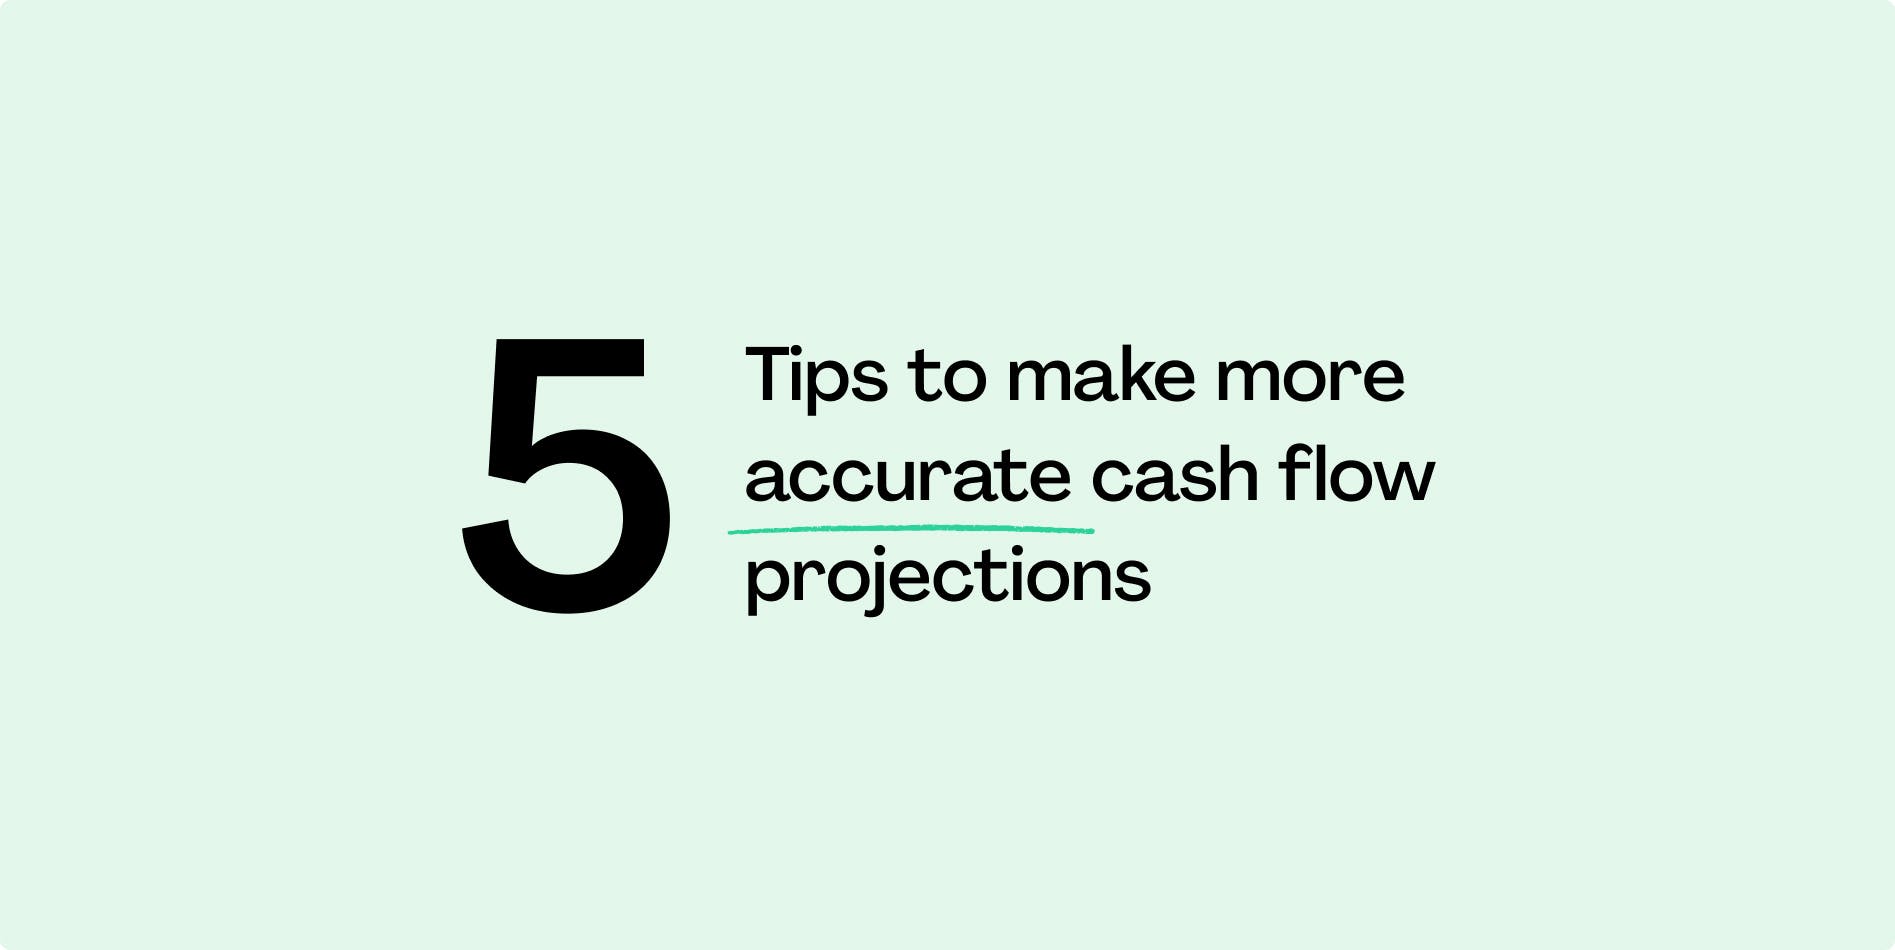 5-tips-for-more-accurate-cashflow-projections.jpg